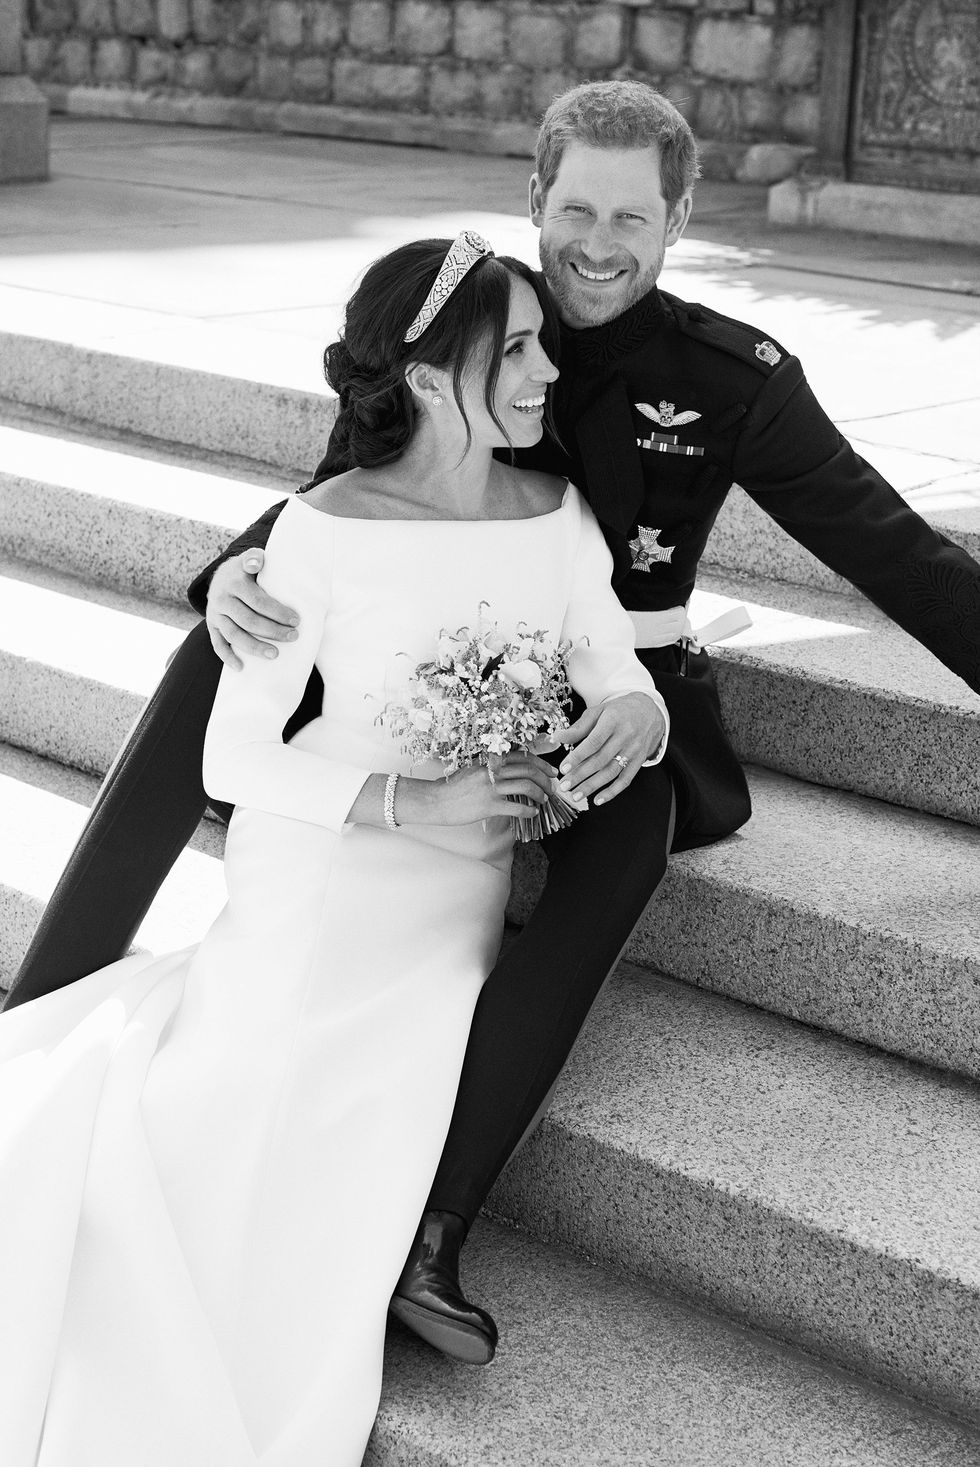 Prince Harry and Meghan Markle official wedding portrait